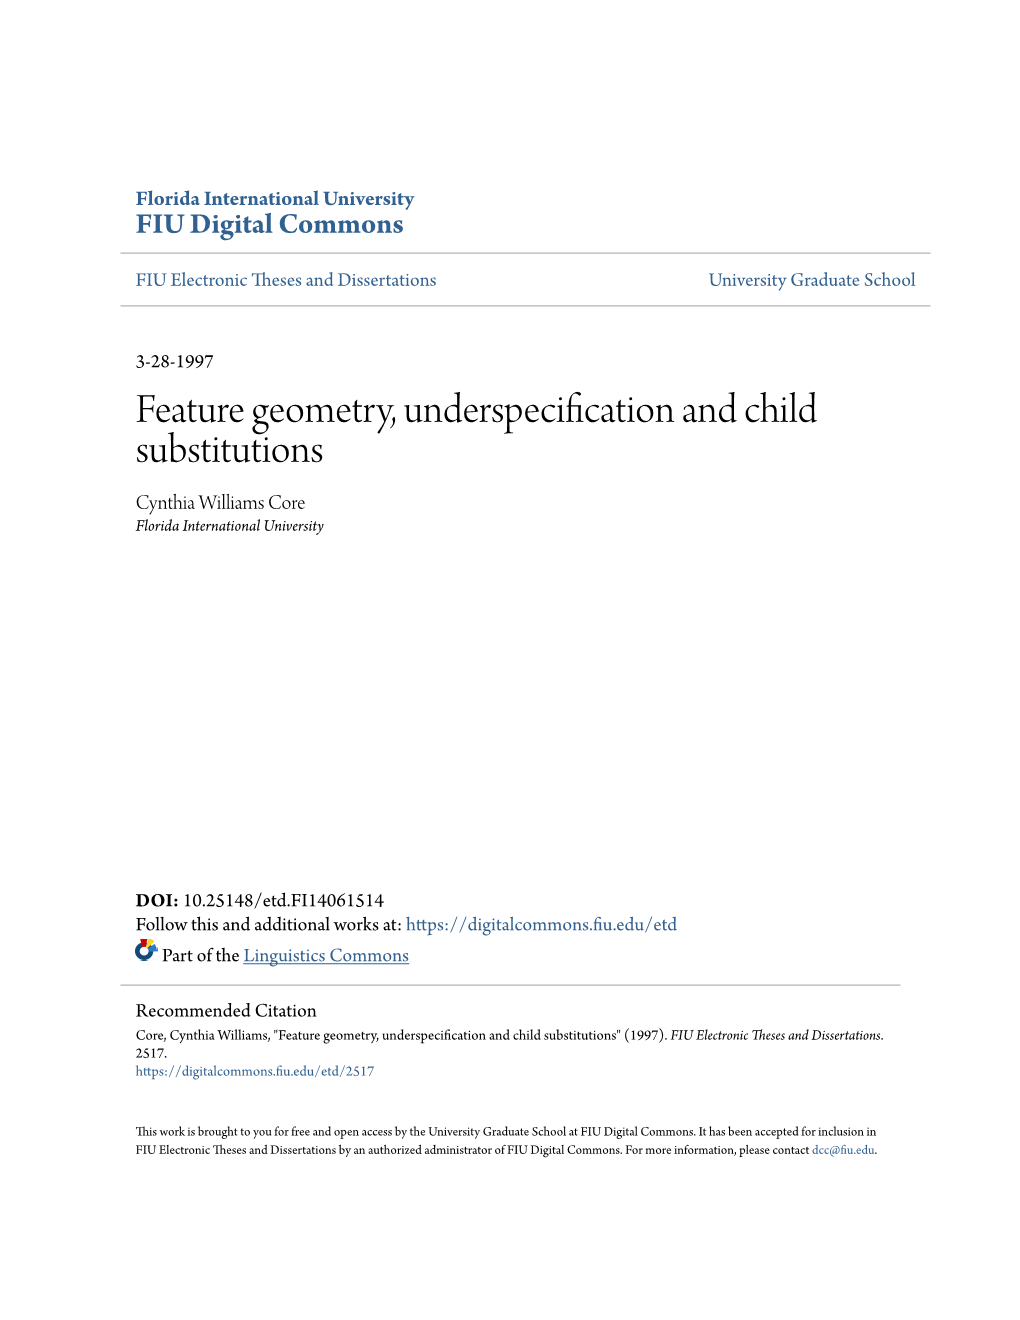 Feature Geometry, Underspecification and Child Substitutions Cynthia Williams Core Florida International University